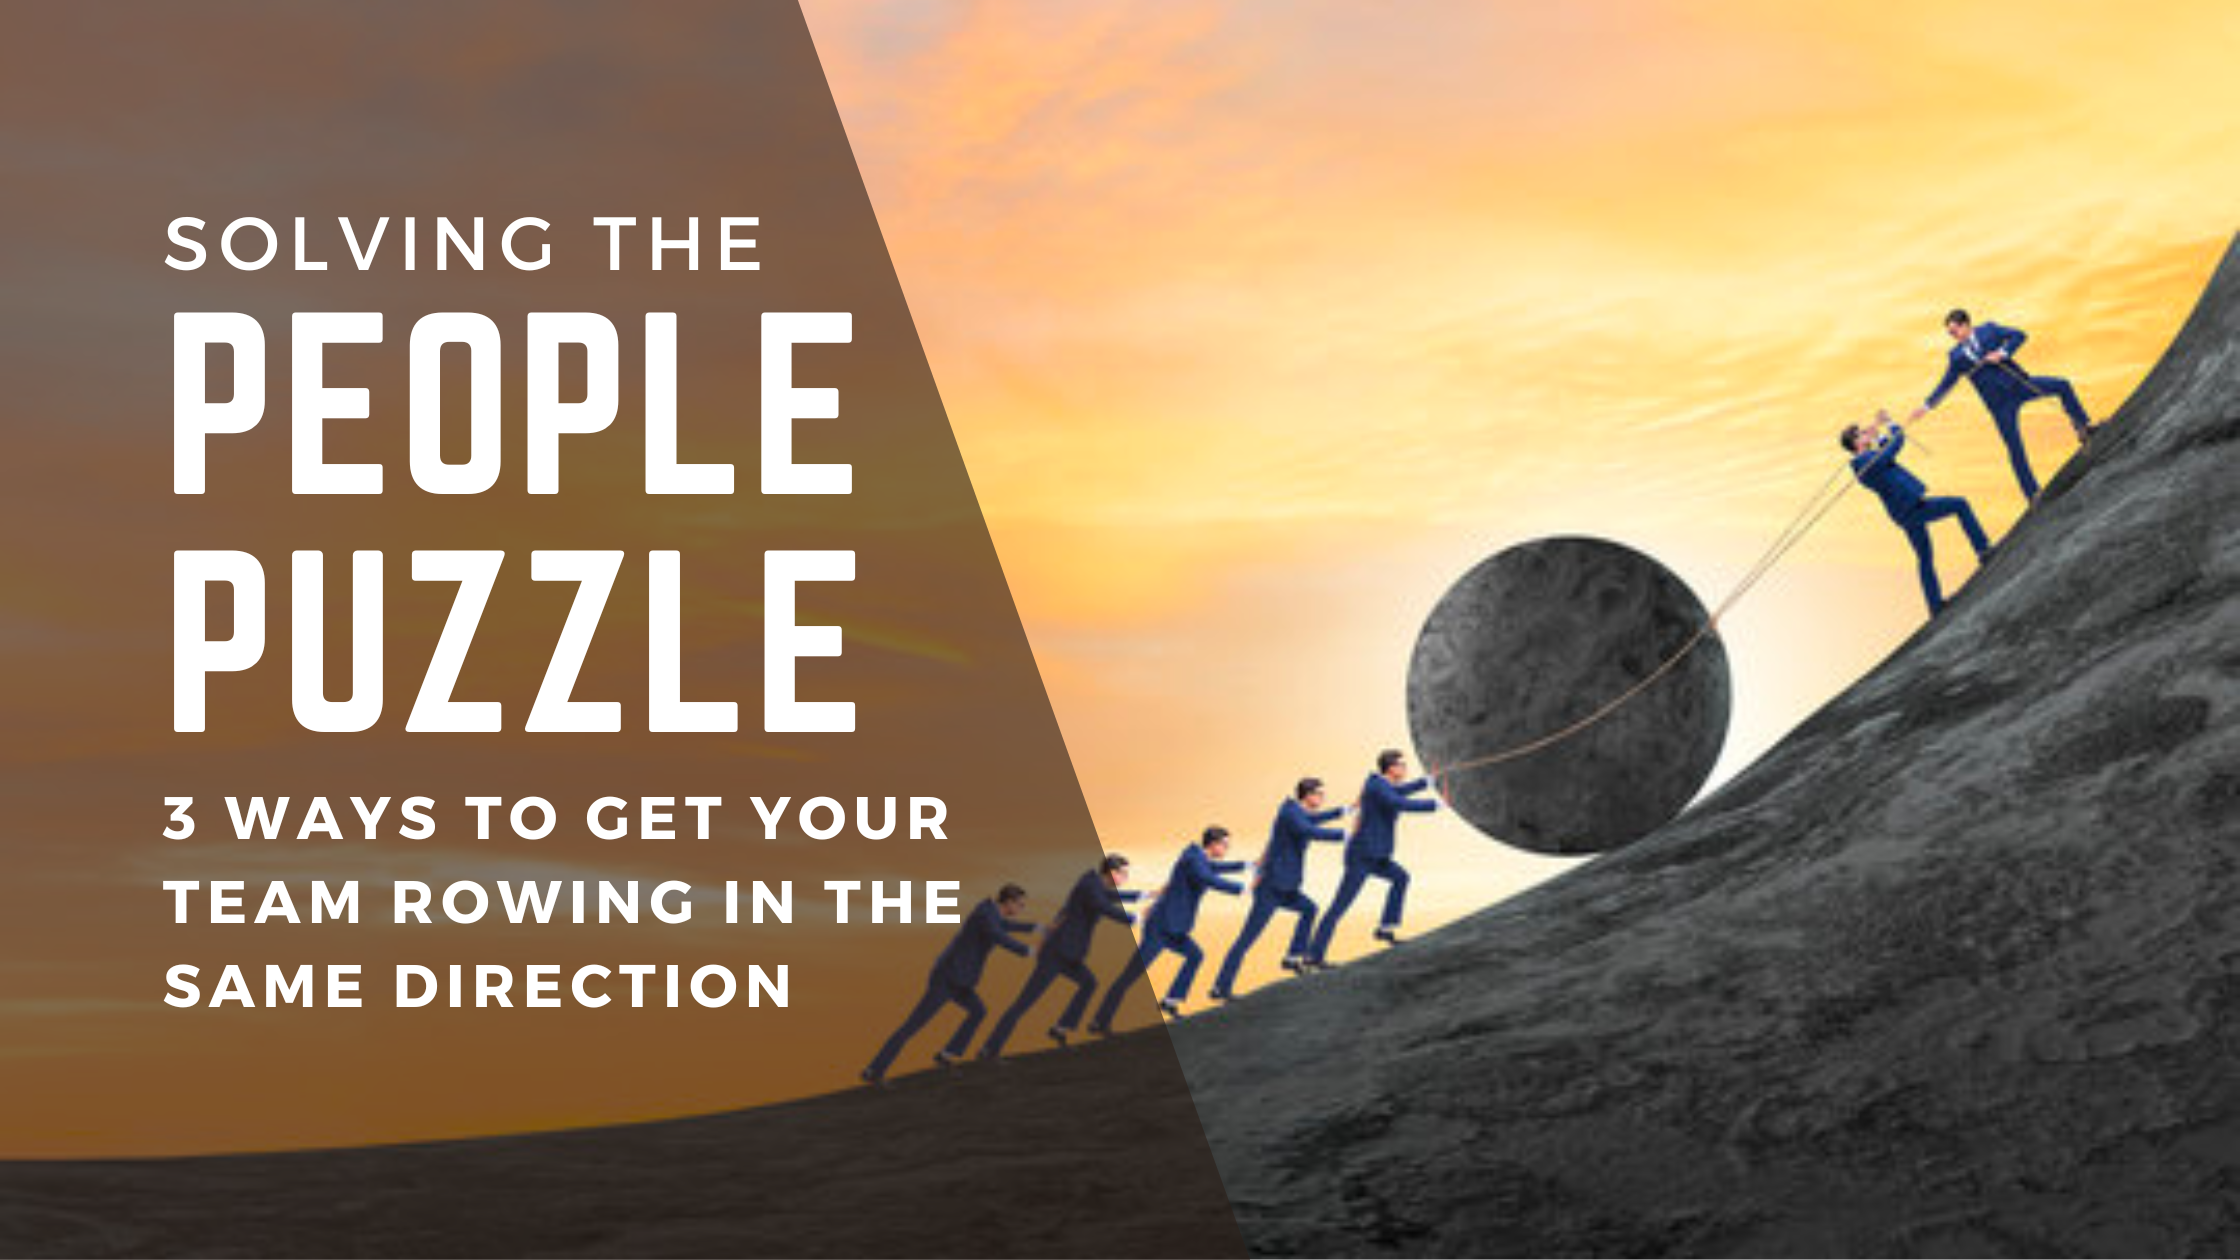 Solving “The People Puzzle” On Your Team